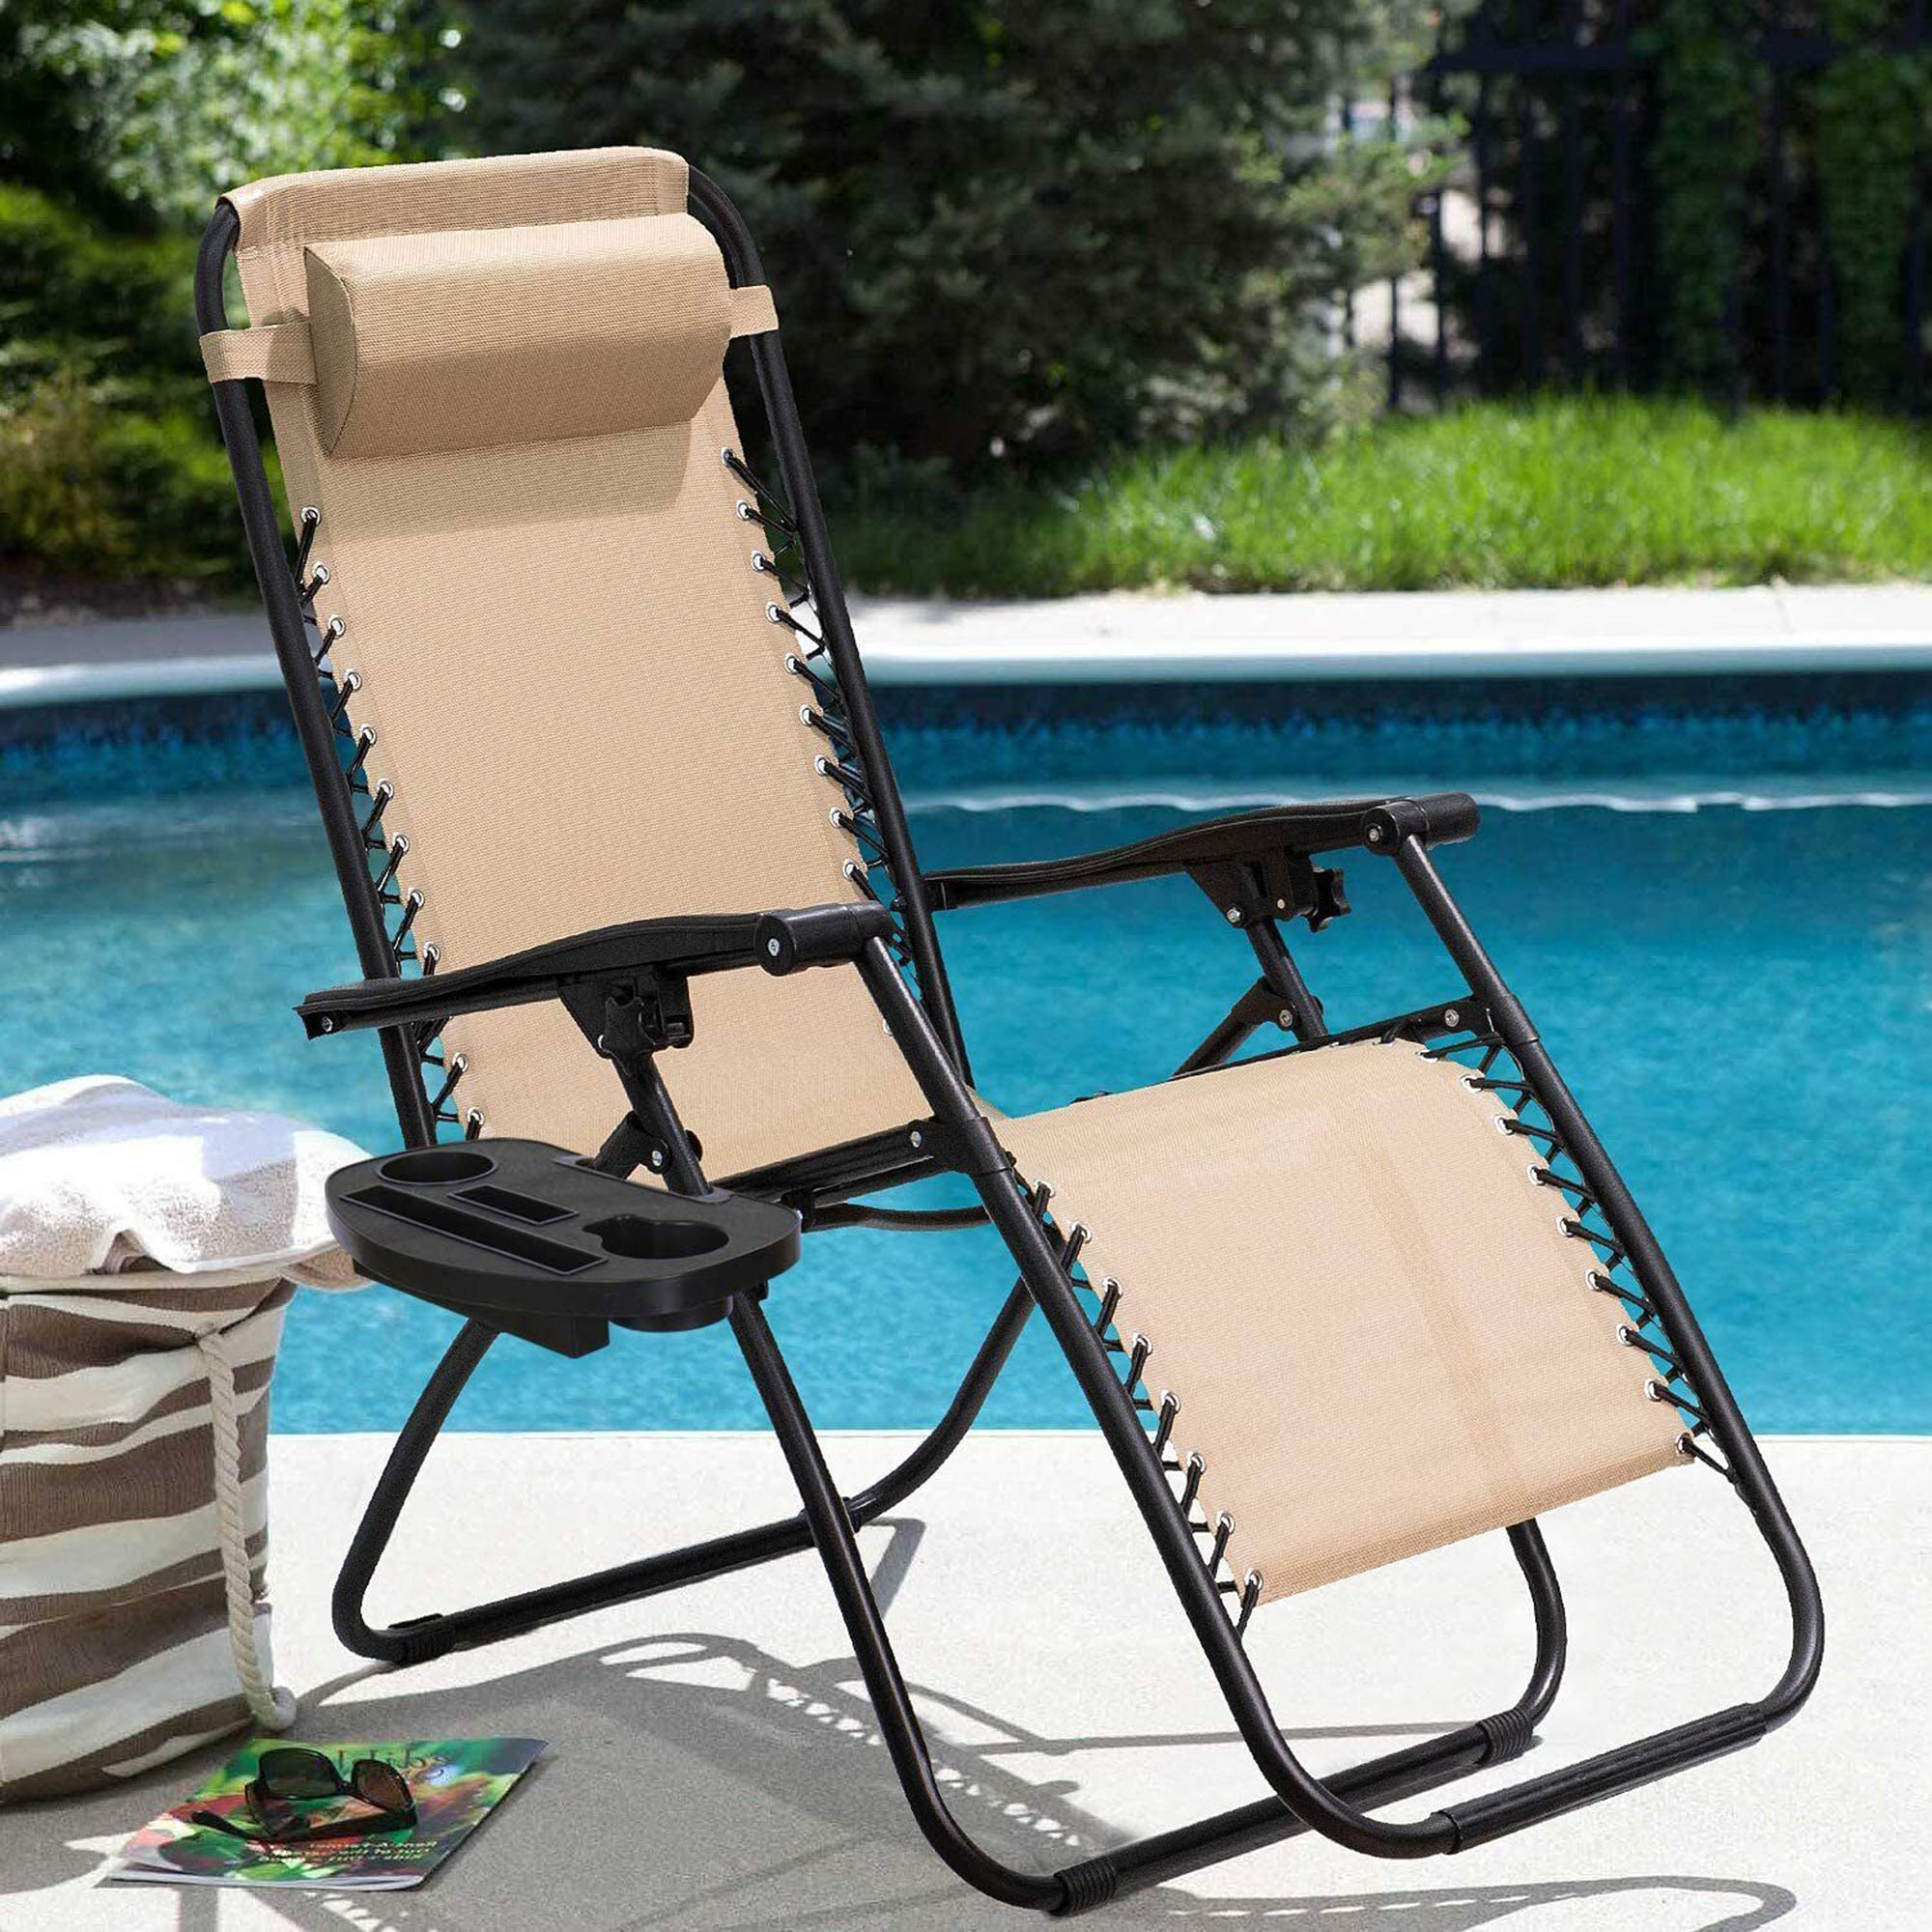 YouLoveIt Set of 2 Zero Gravity Chair Patio Folding Lawn Lounge Chairs Adjustable Reclining Chairs Pool Side Using Lawn Lounge Chair Recliners for Patio - image 2 of 3